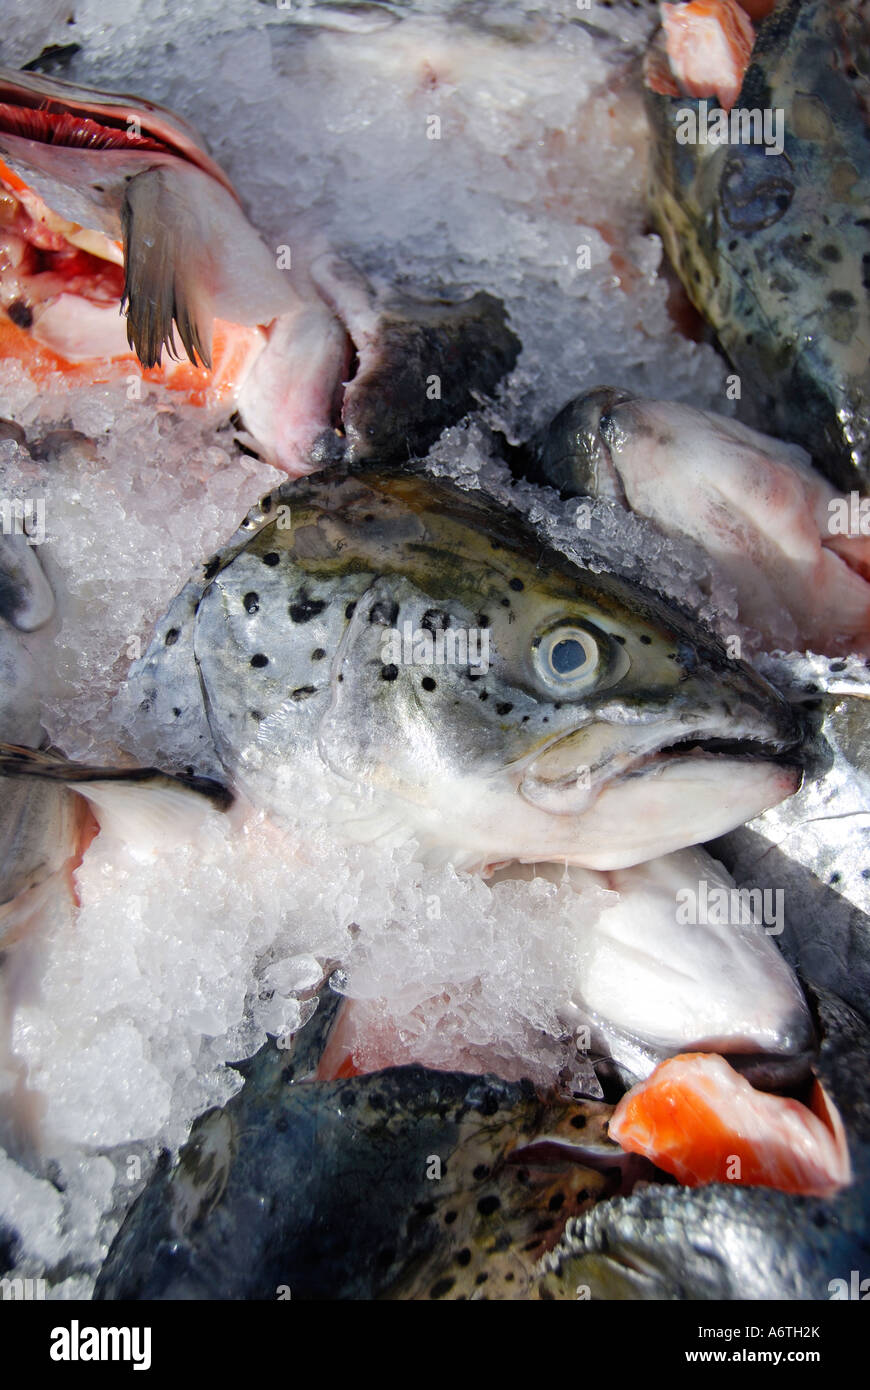 'Farmed salmon heads and tails, 'on ice', California' Stock Photo